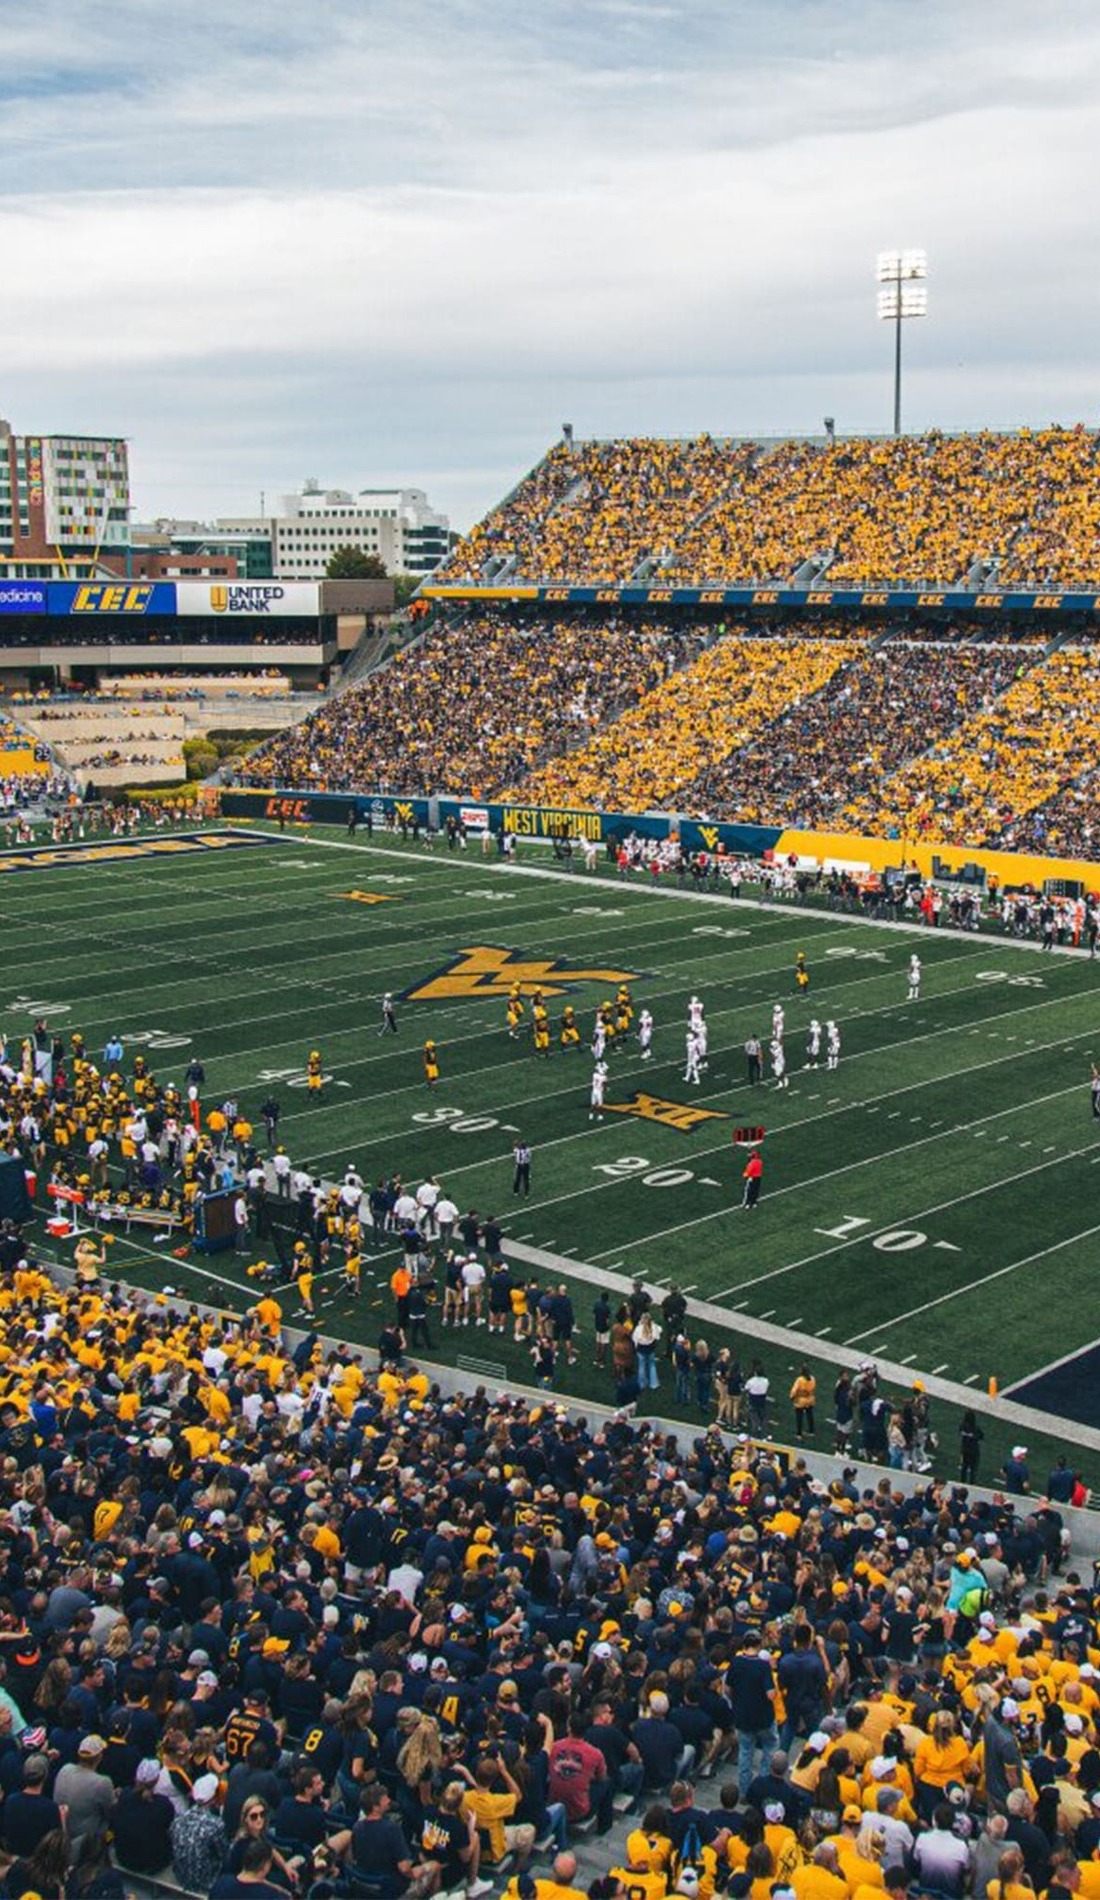 A West Virginia Mountaineers Football live event